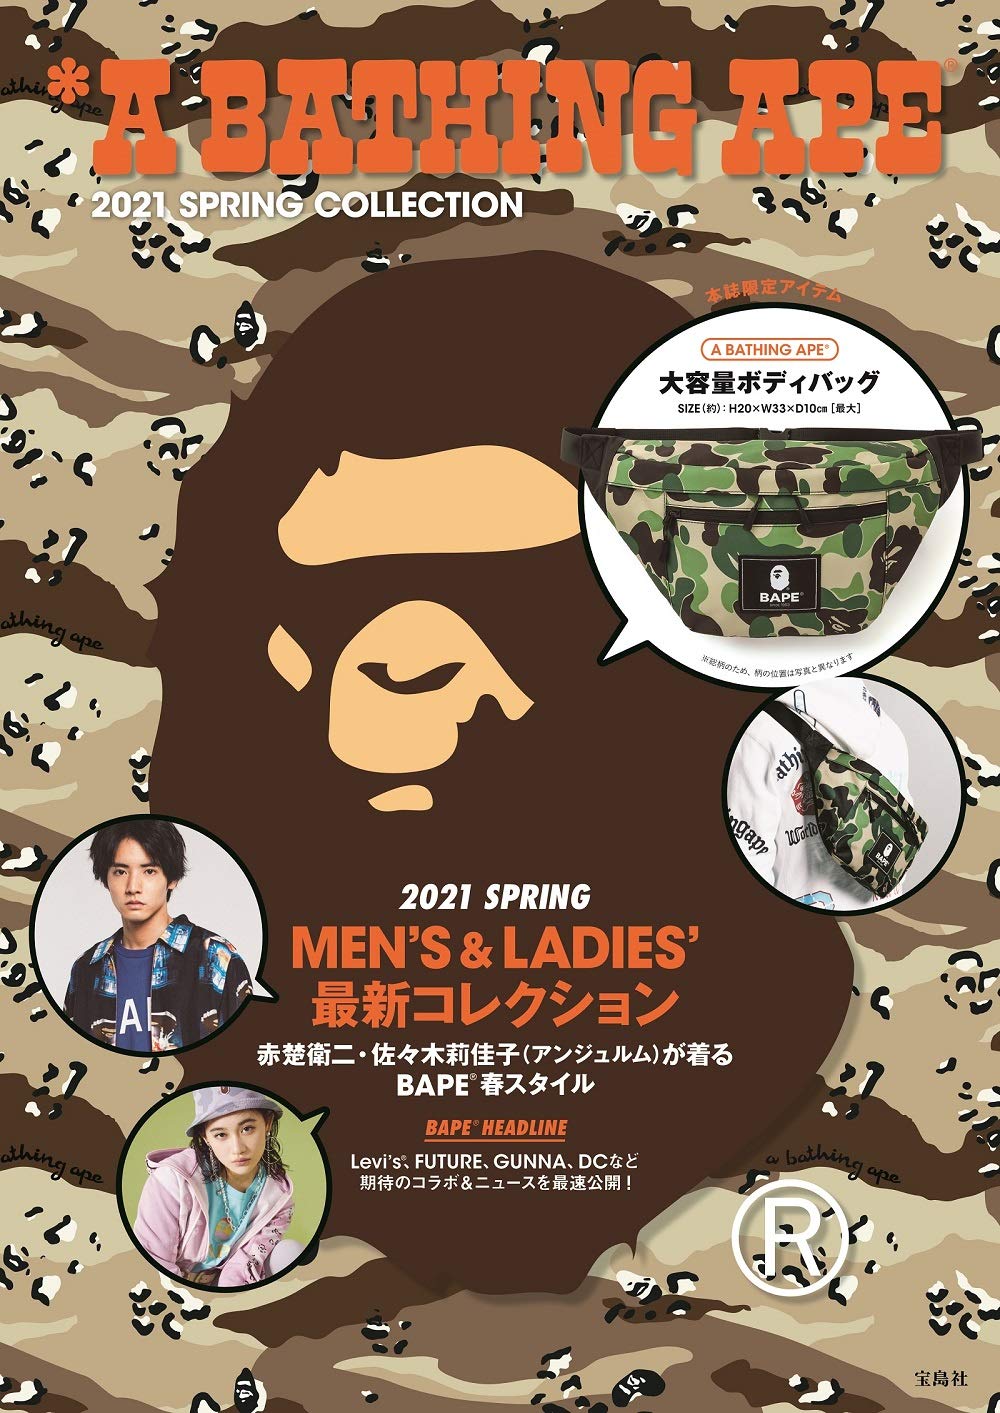 A BATHING APE® 2021 SPRING COLLECTION